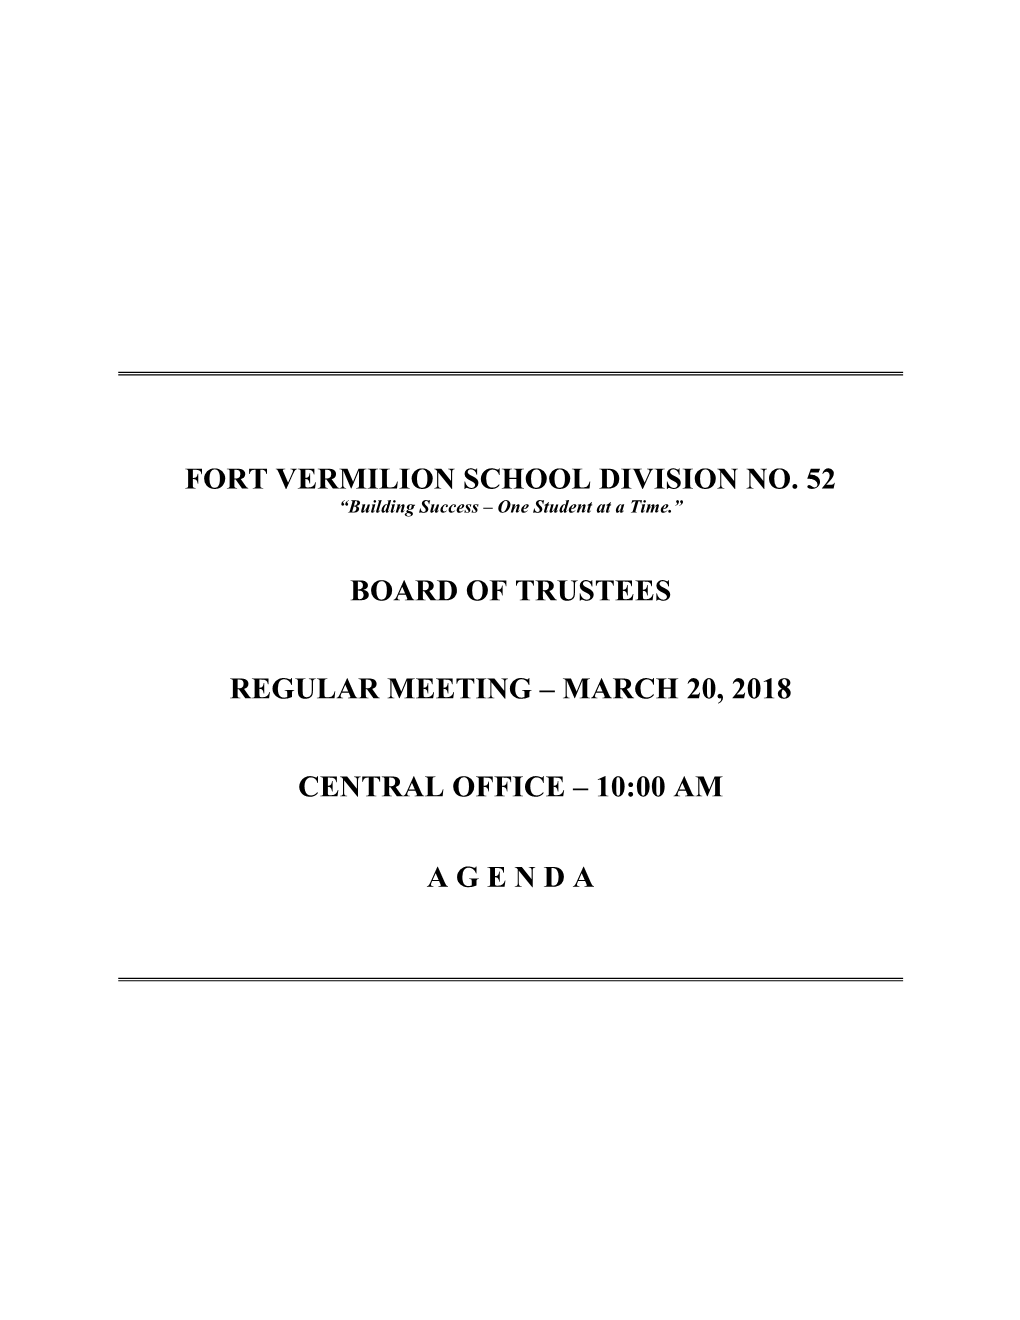 Fort Vermilion School Division No. 52 Board of Trustees Regular Meeting – March 20, 2018 Central Office – 10:00 A.M